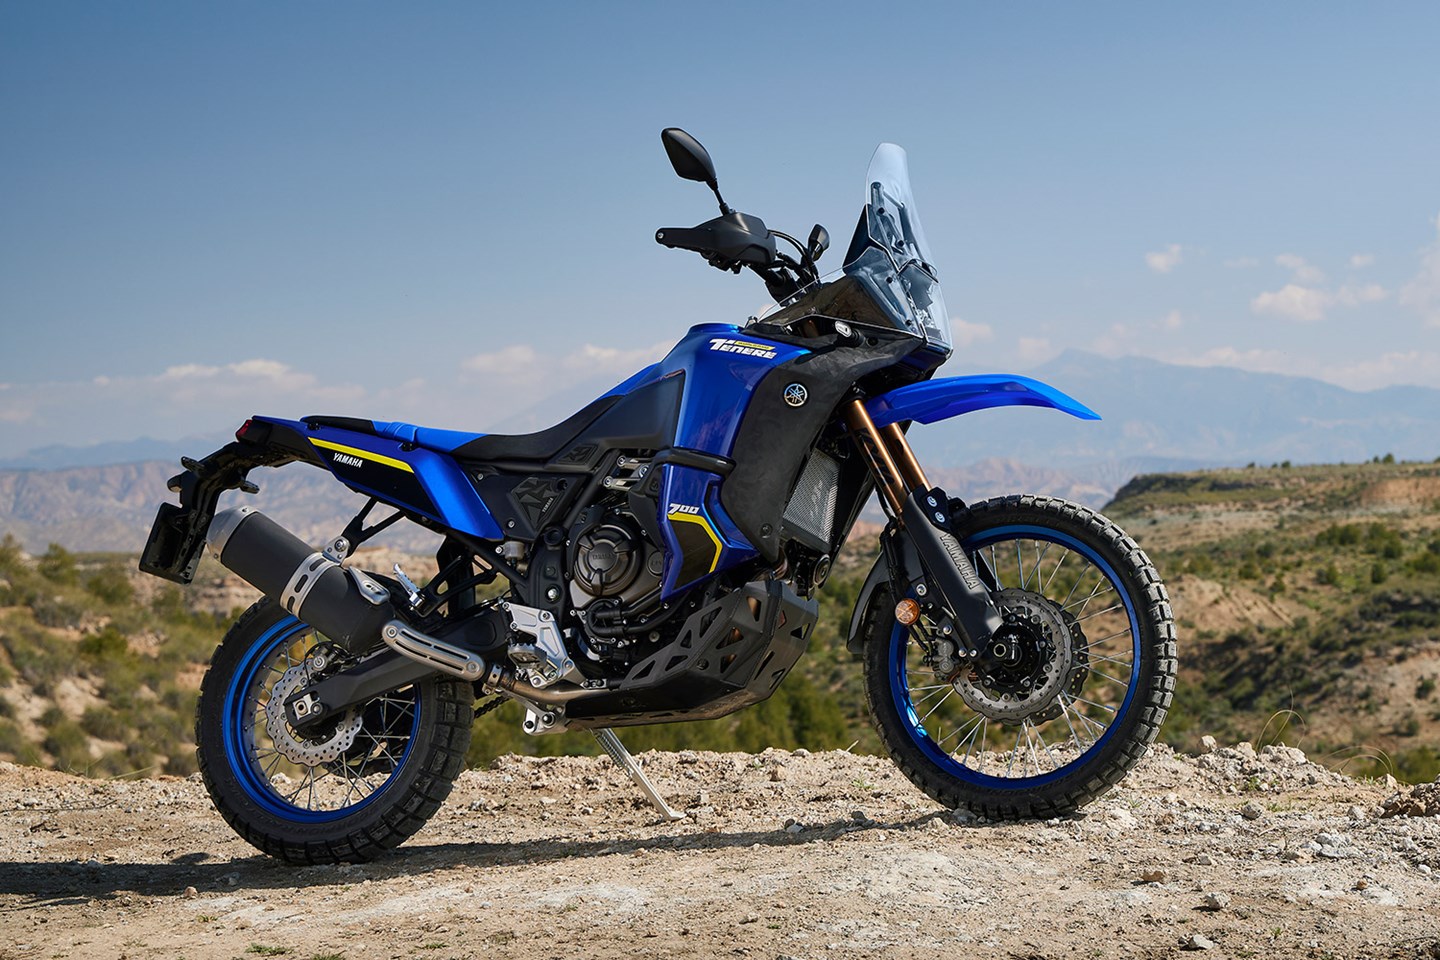 2022 Yamaha Tenere 700 Review: An Old-School Bike Designed for the Long  Haul